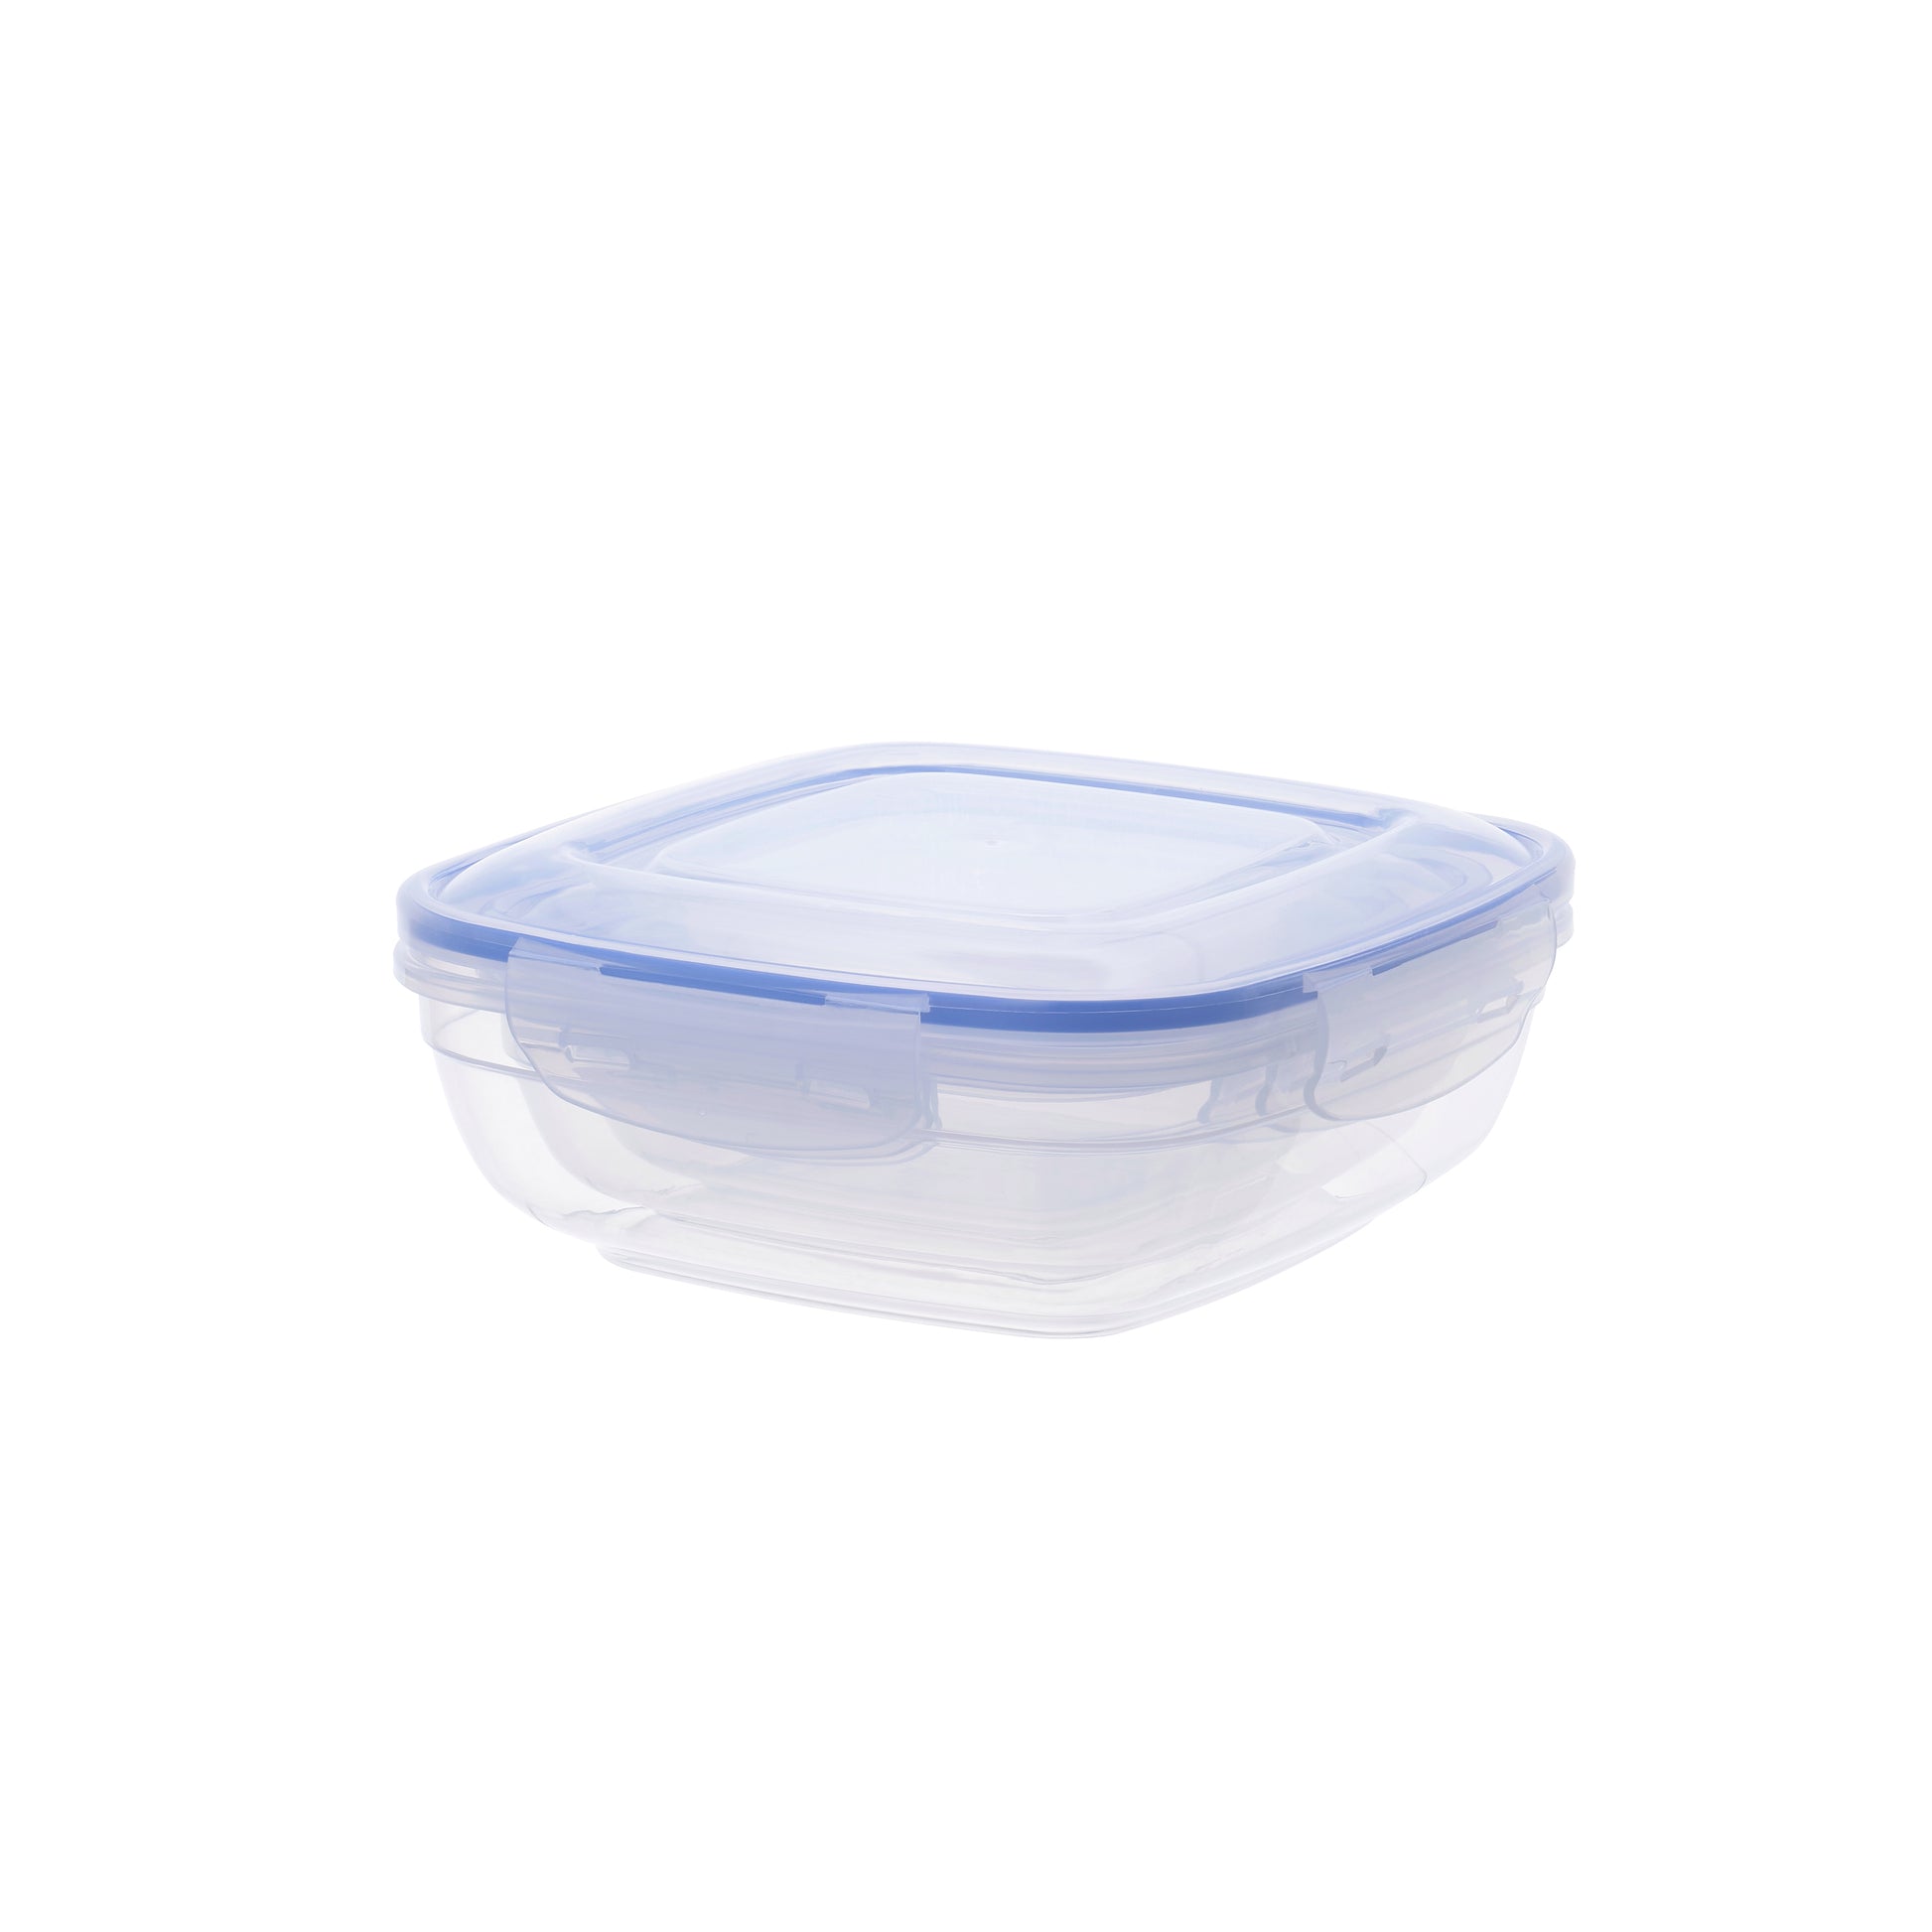  S SALIENT Airtight Meal Prep Containers for Food